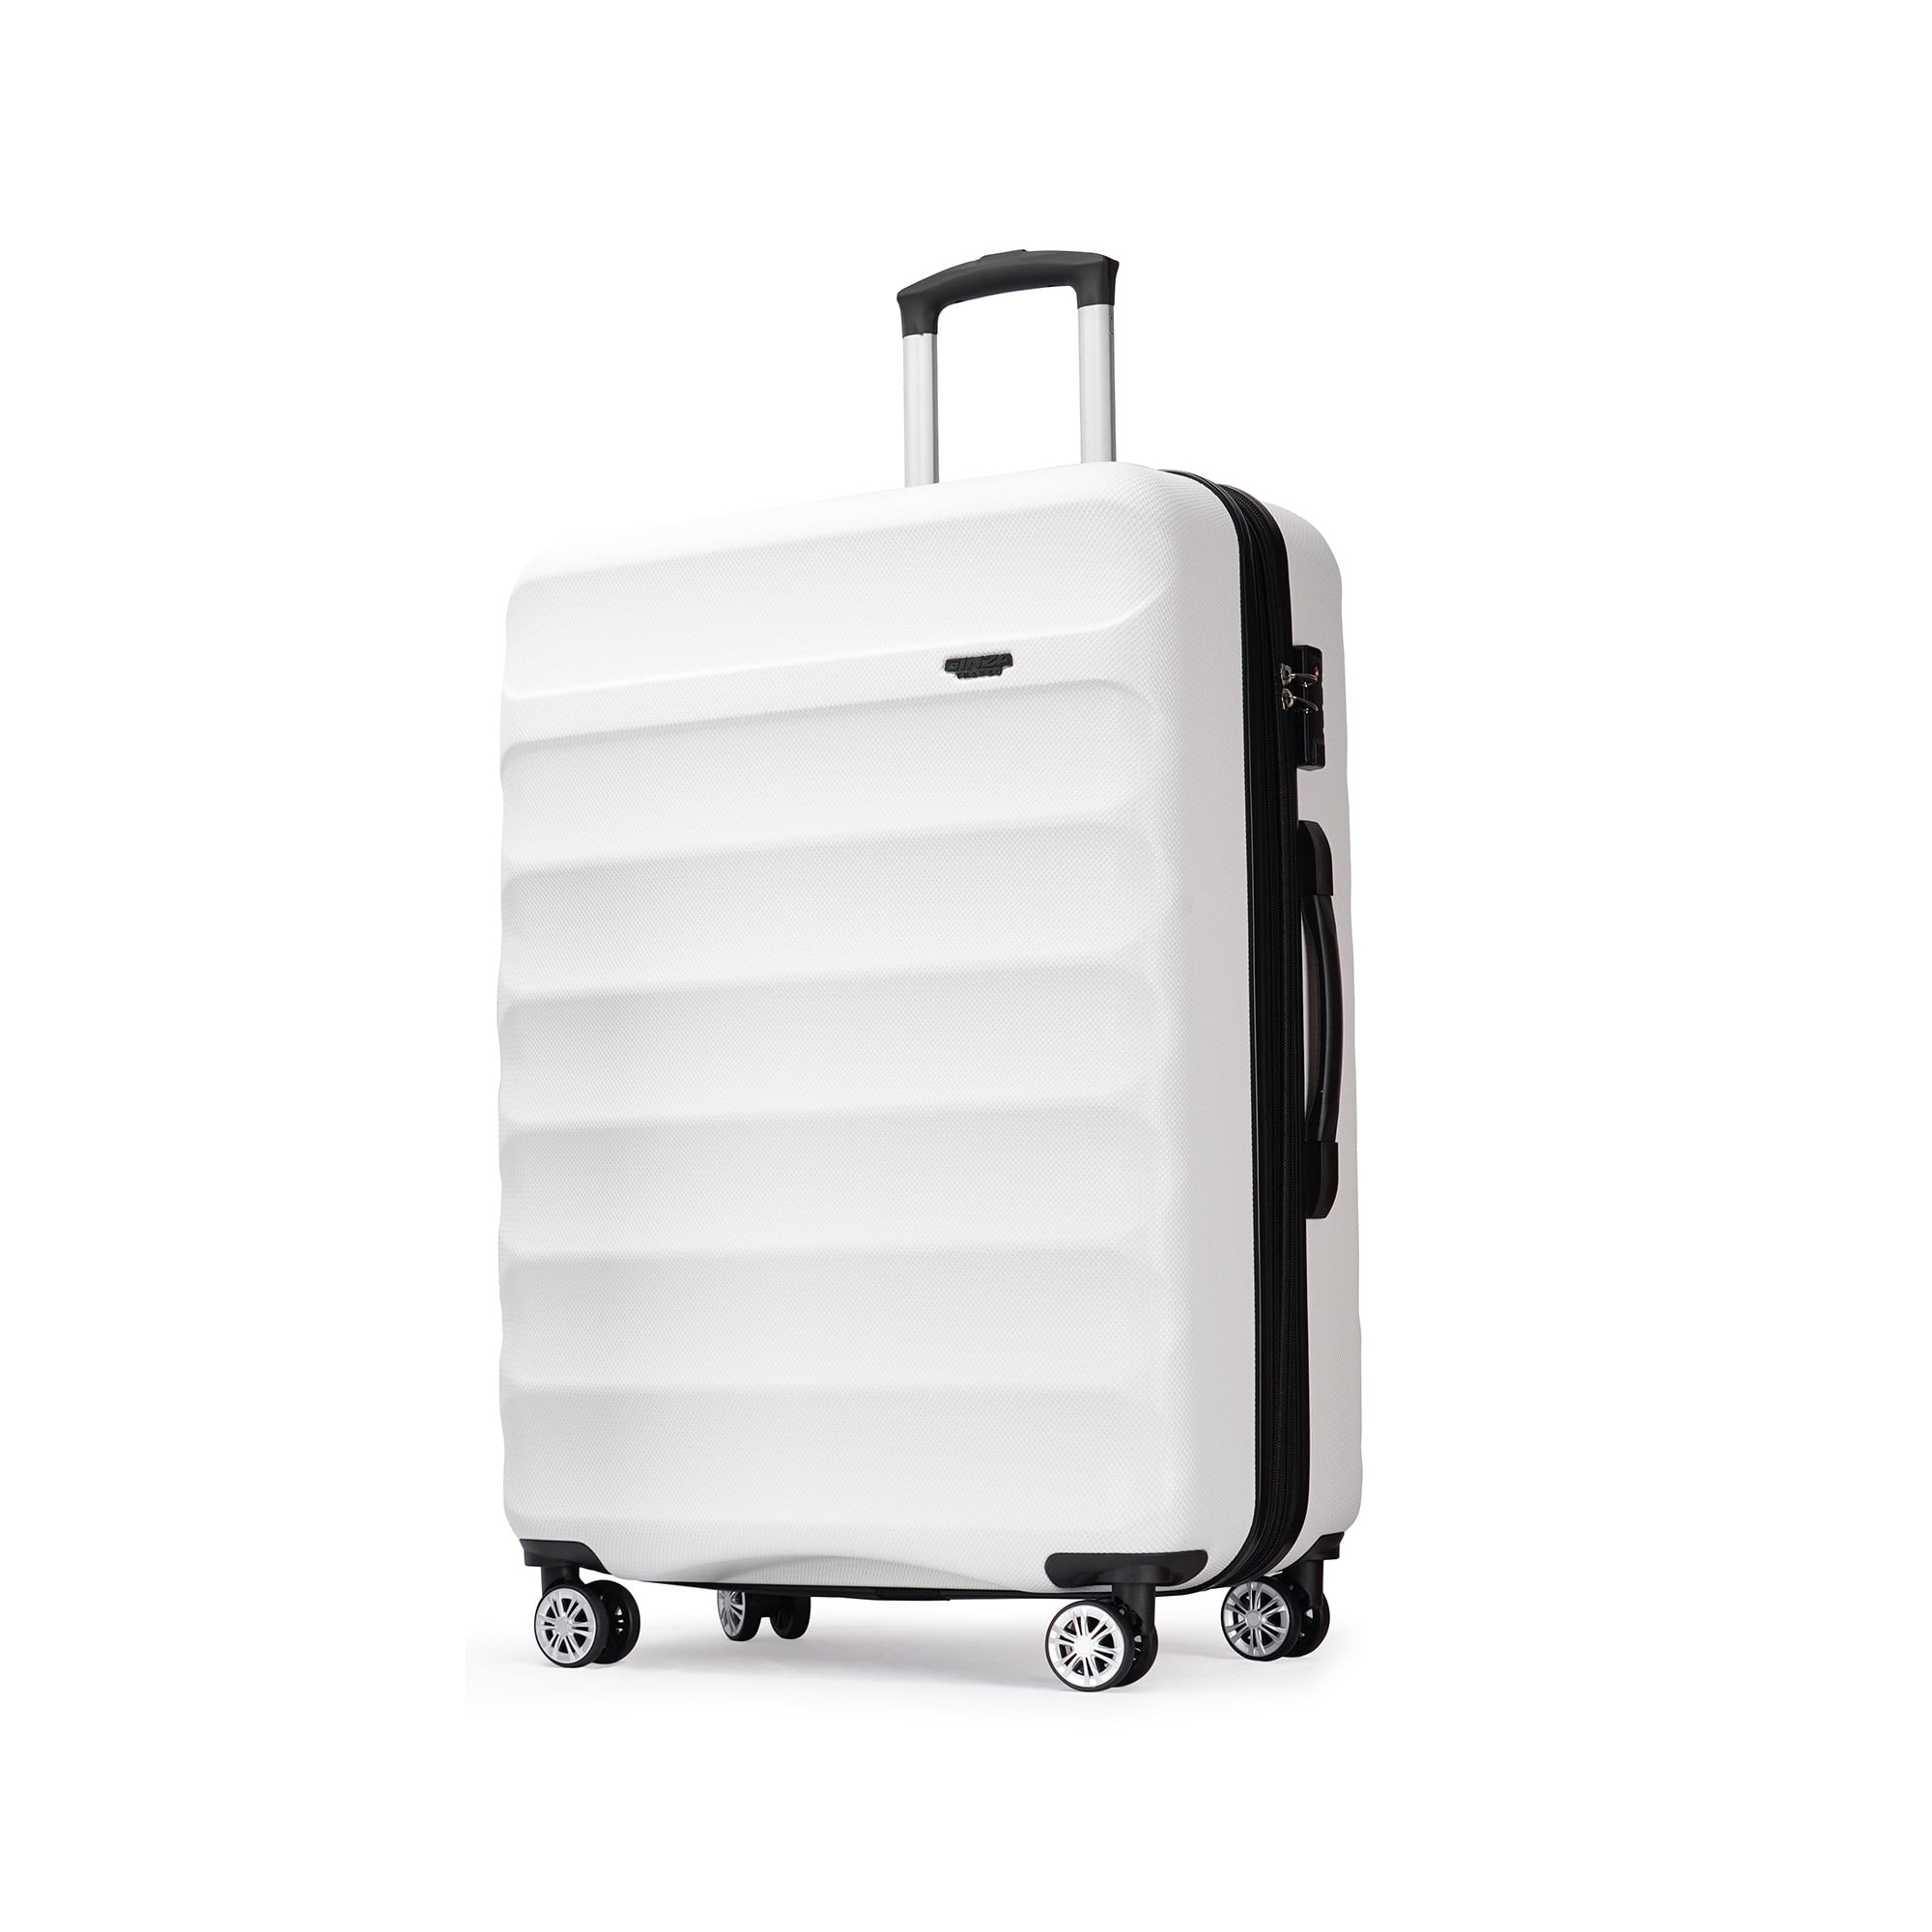 Ginza Travel 28 inch Hardside Checked Luggage for Trips,Lightweight ...